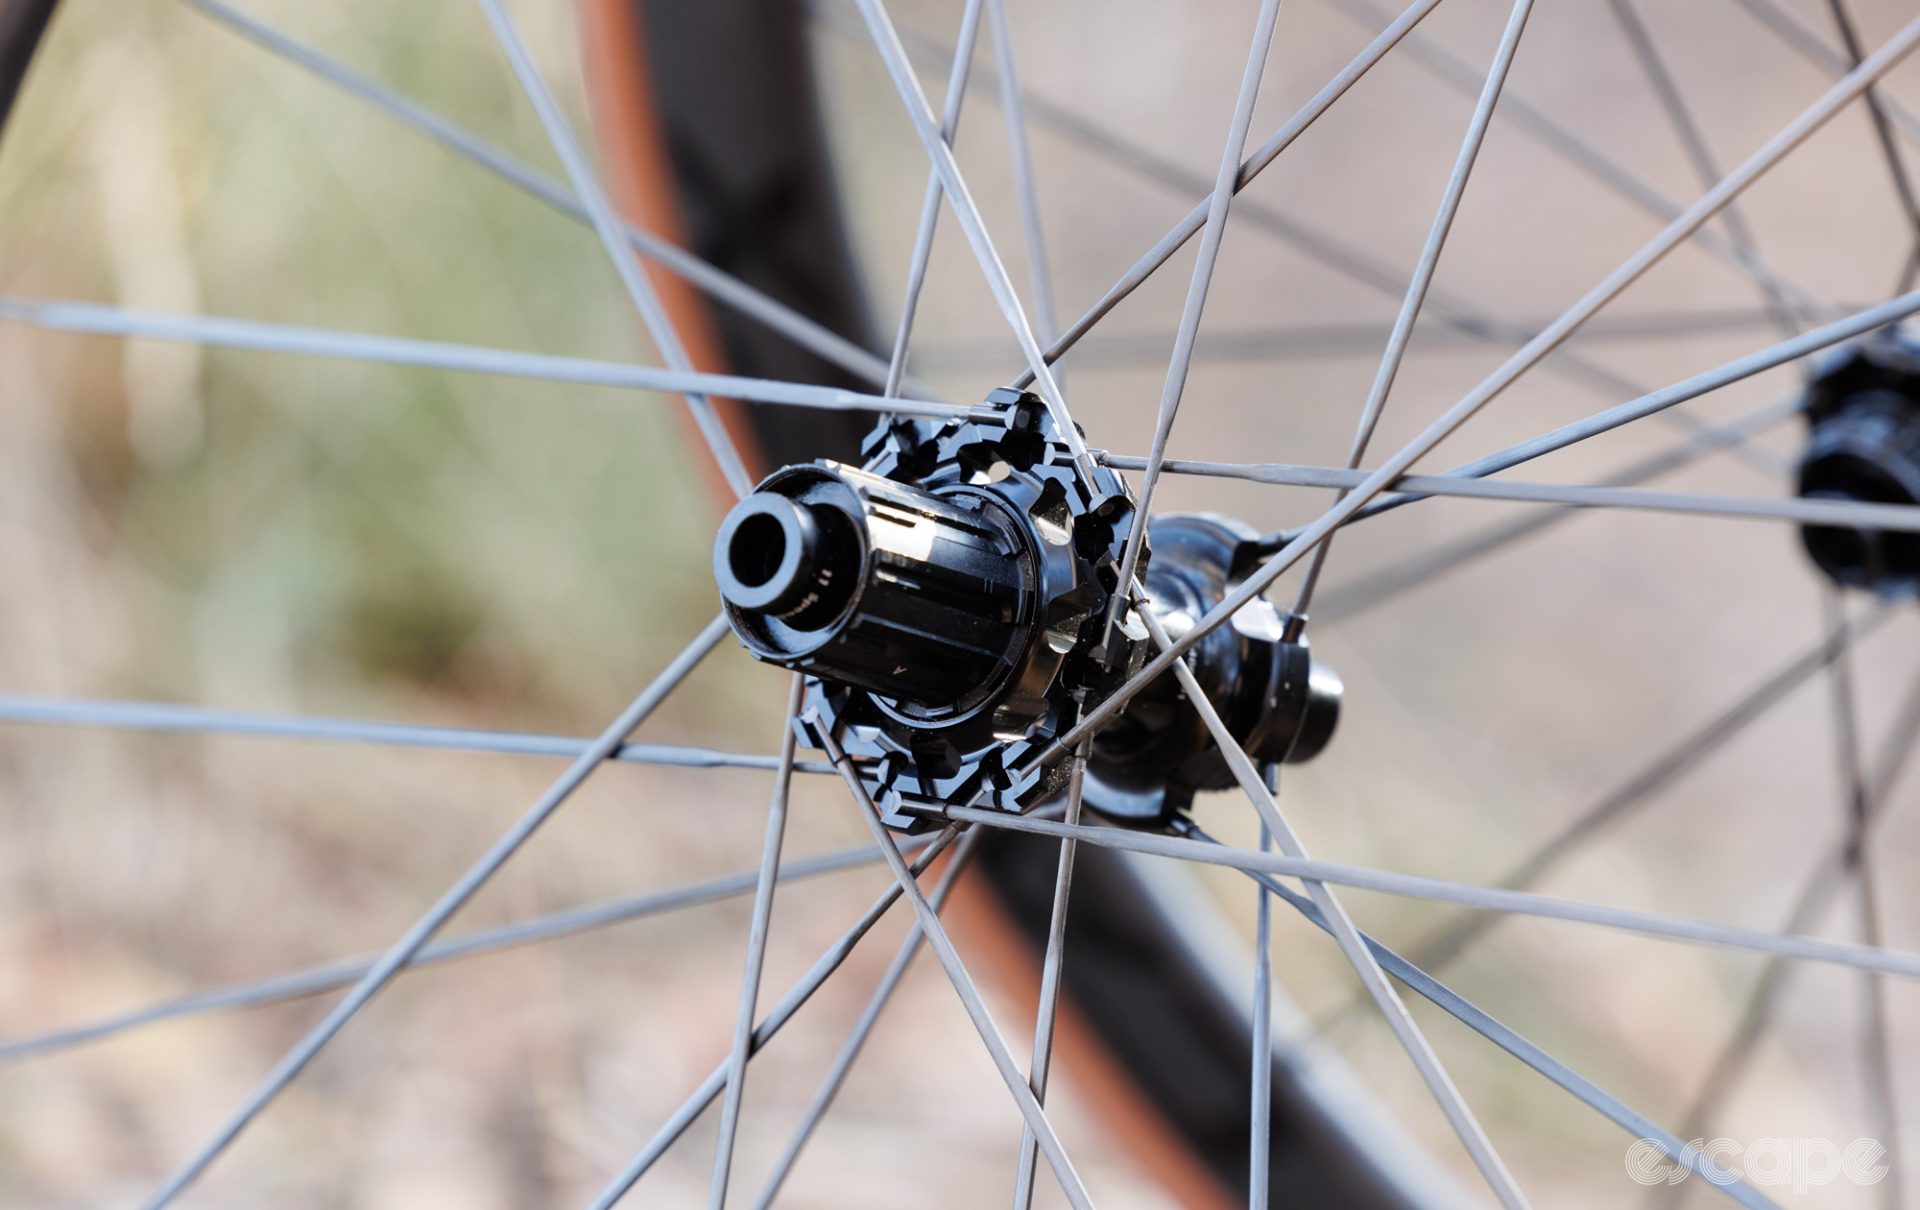 A close-up of the Cadex 36 Disc rear hub, with higher flanges and lots of notches and nooks for the straight-pull spokes, where dirt can collect.